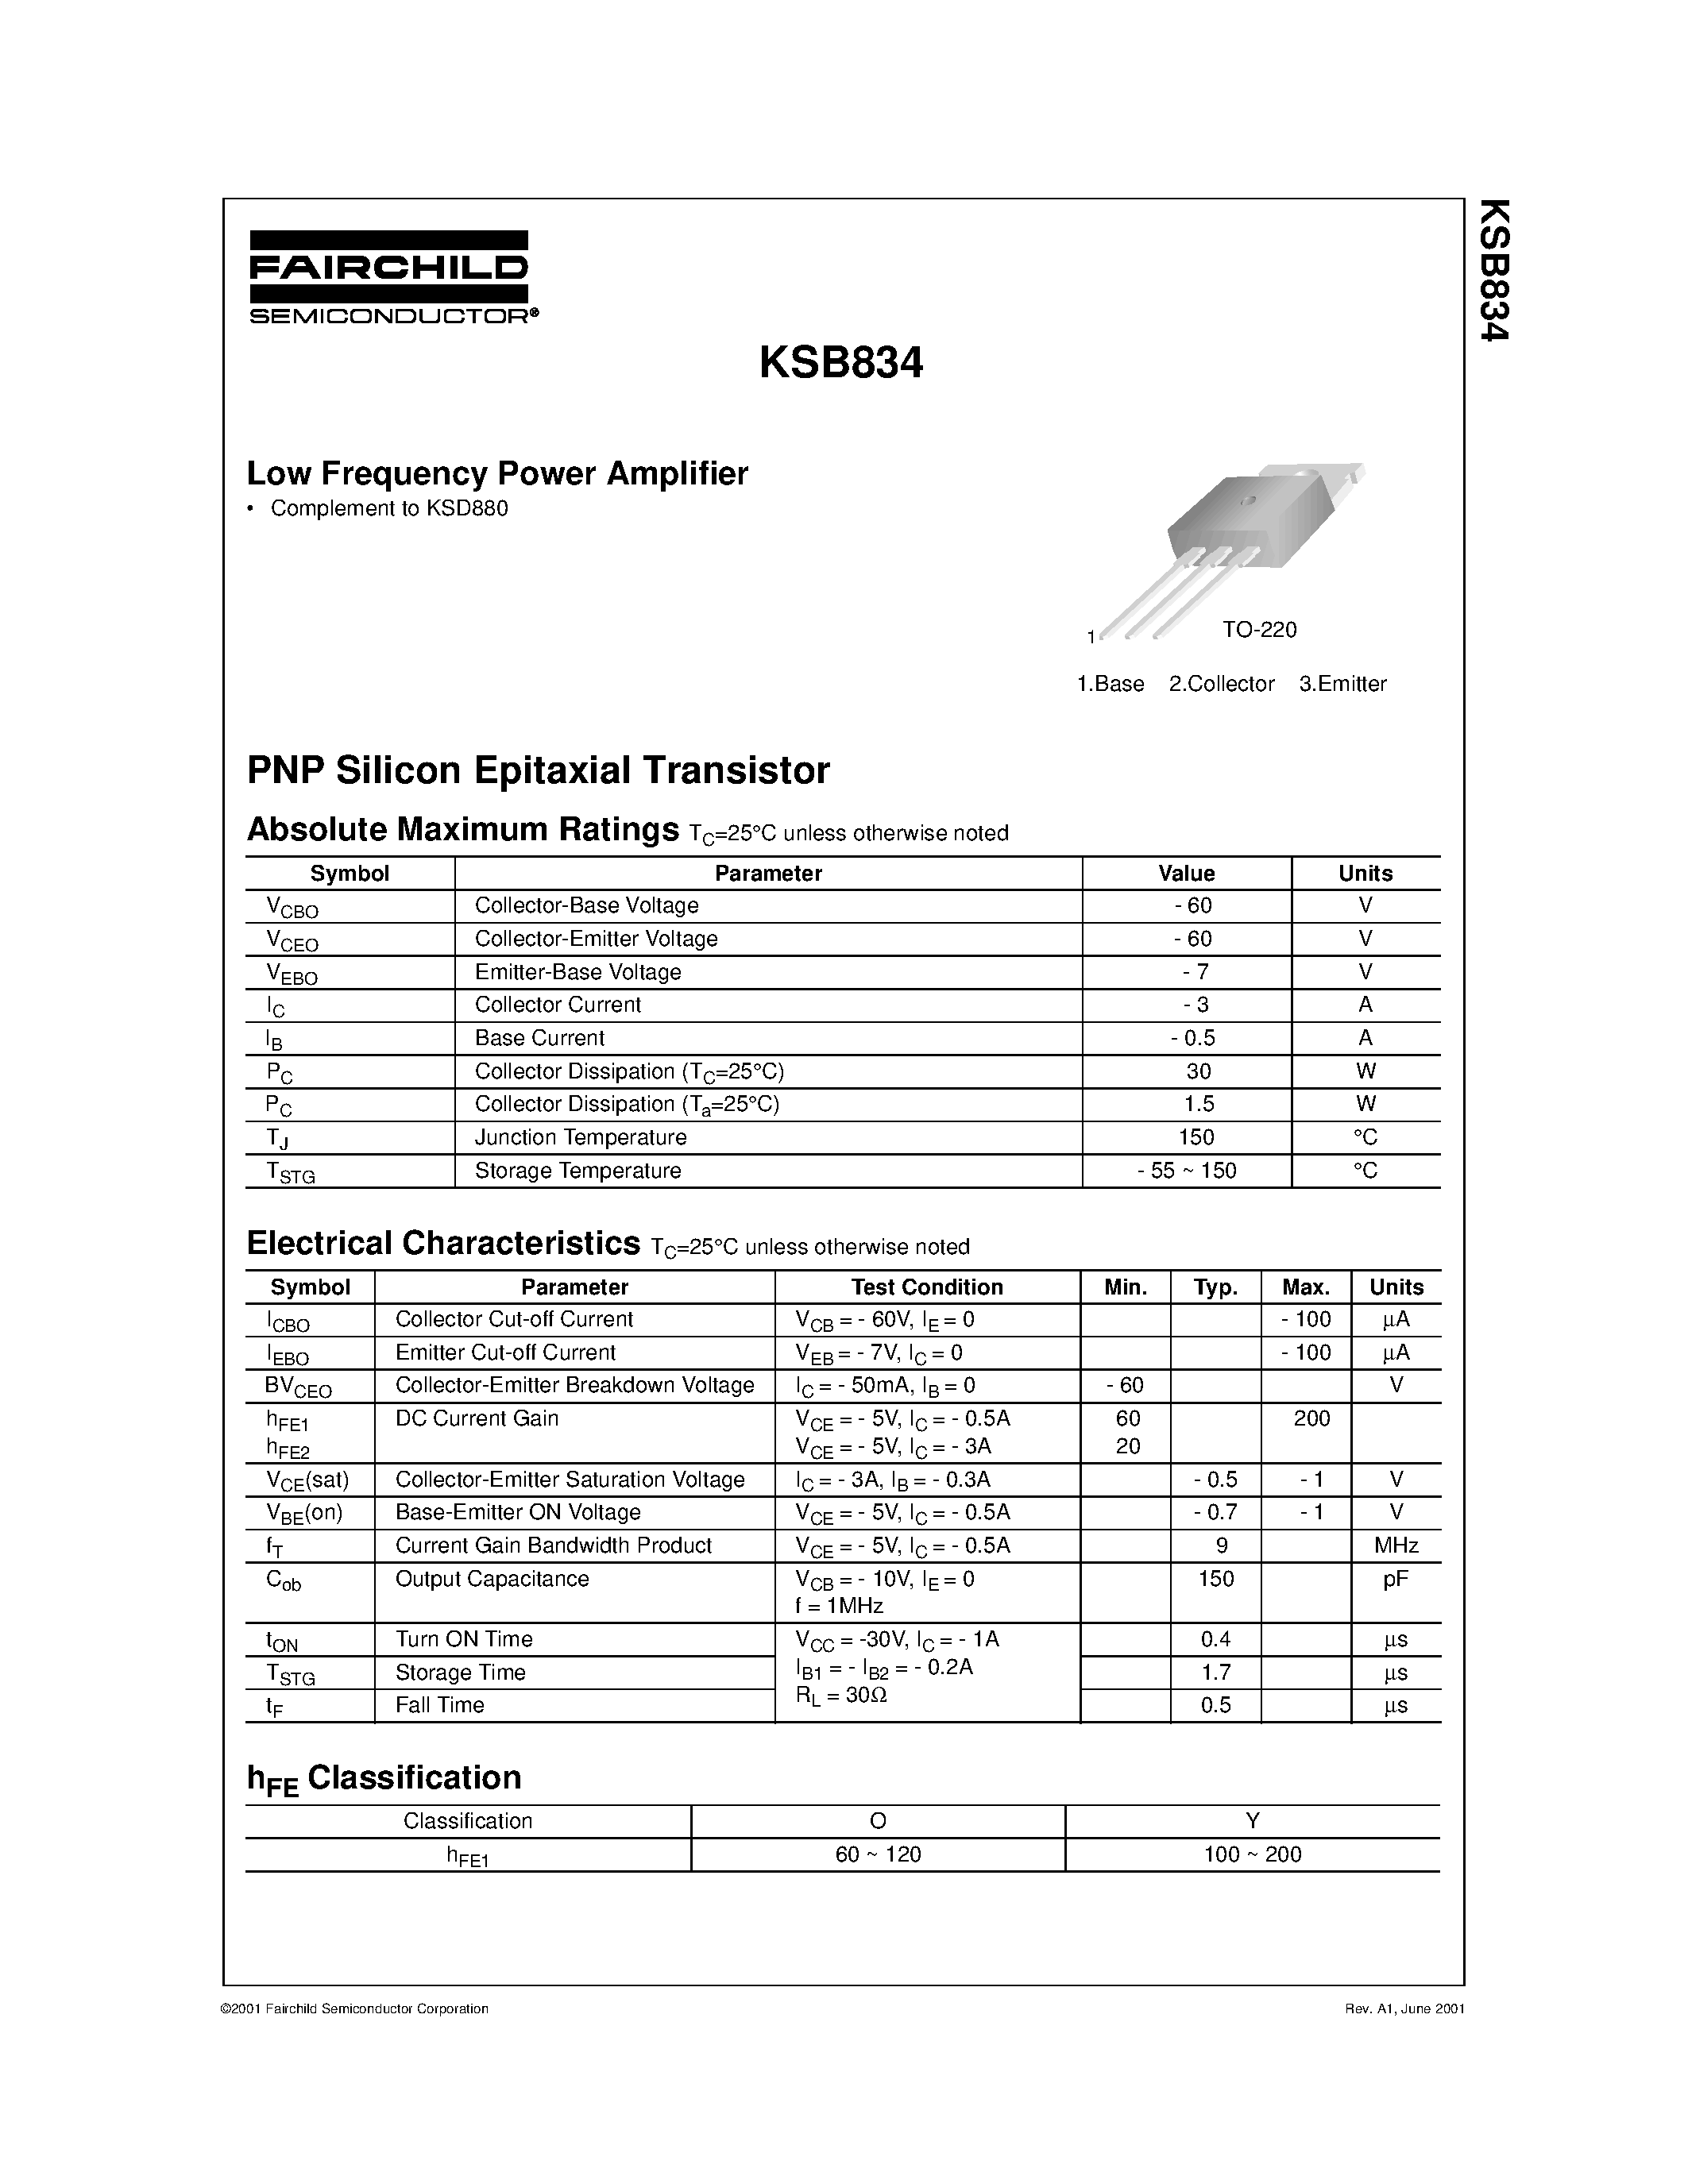 Datasheet KSB834 - Low Frequency Power Amplifier page 1